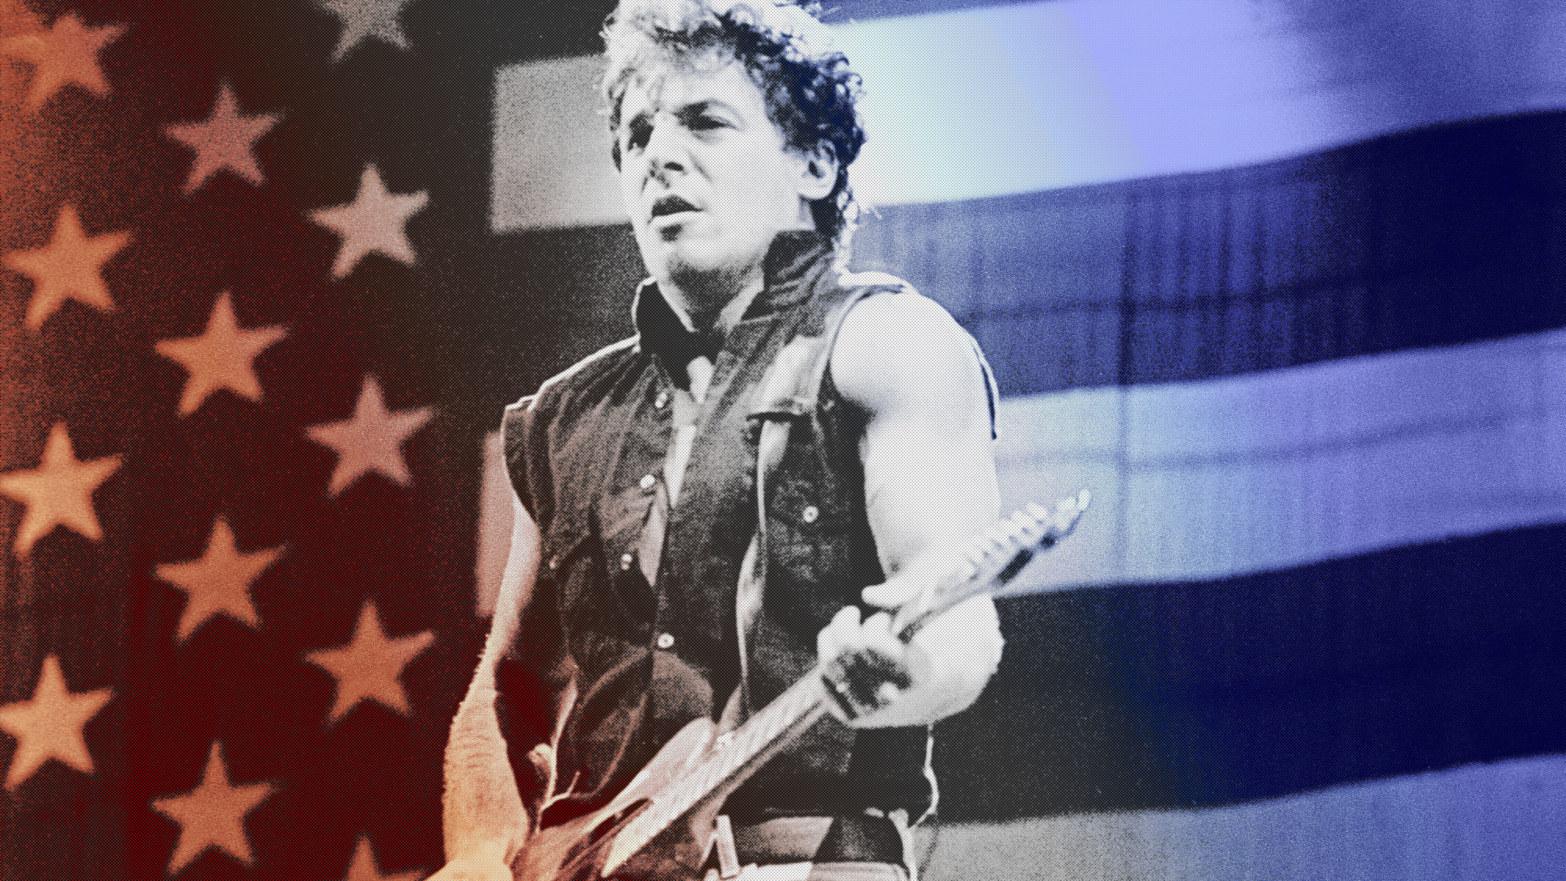 A photo illustration showing Bruce Springsteen performing circa 1985.